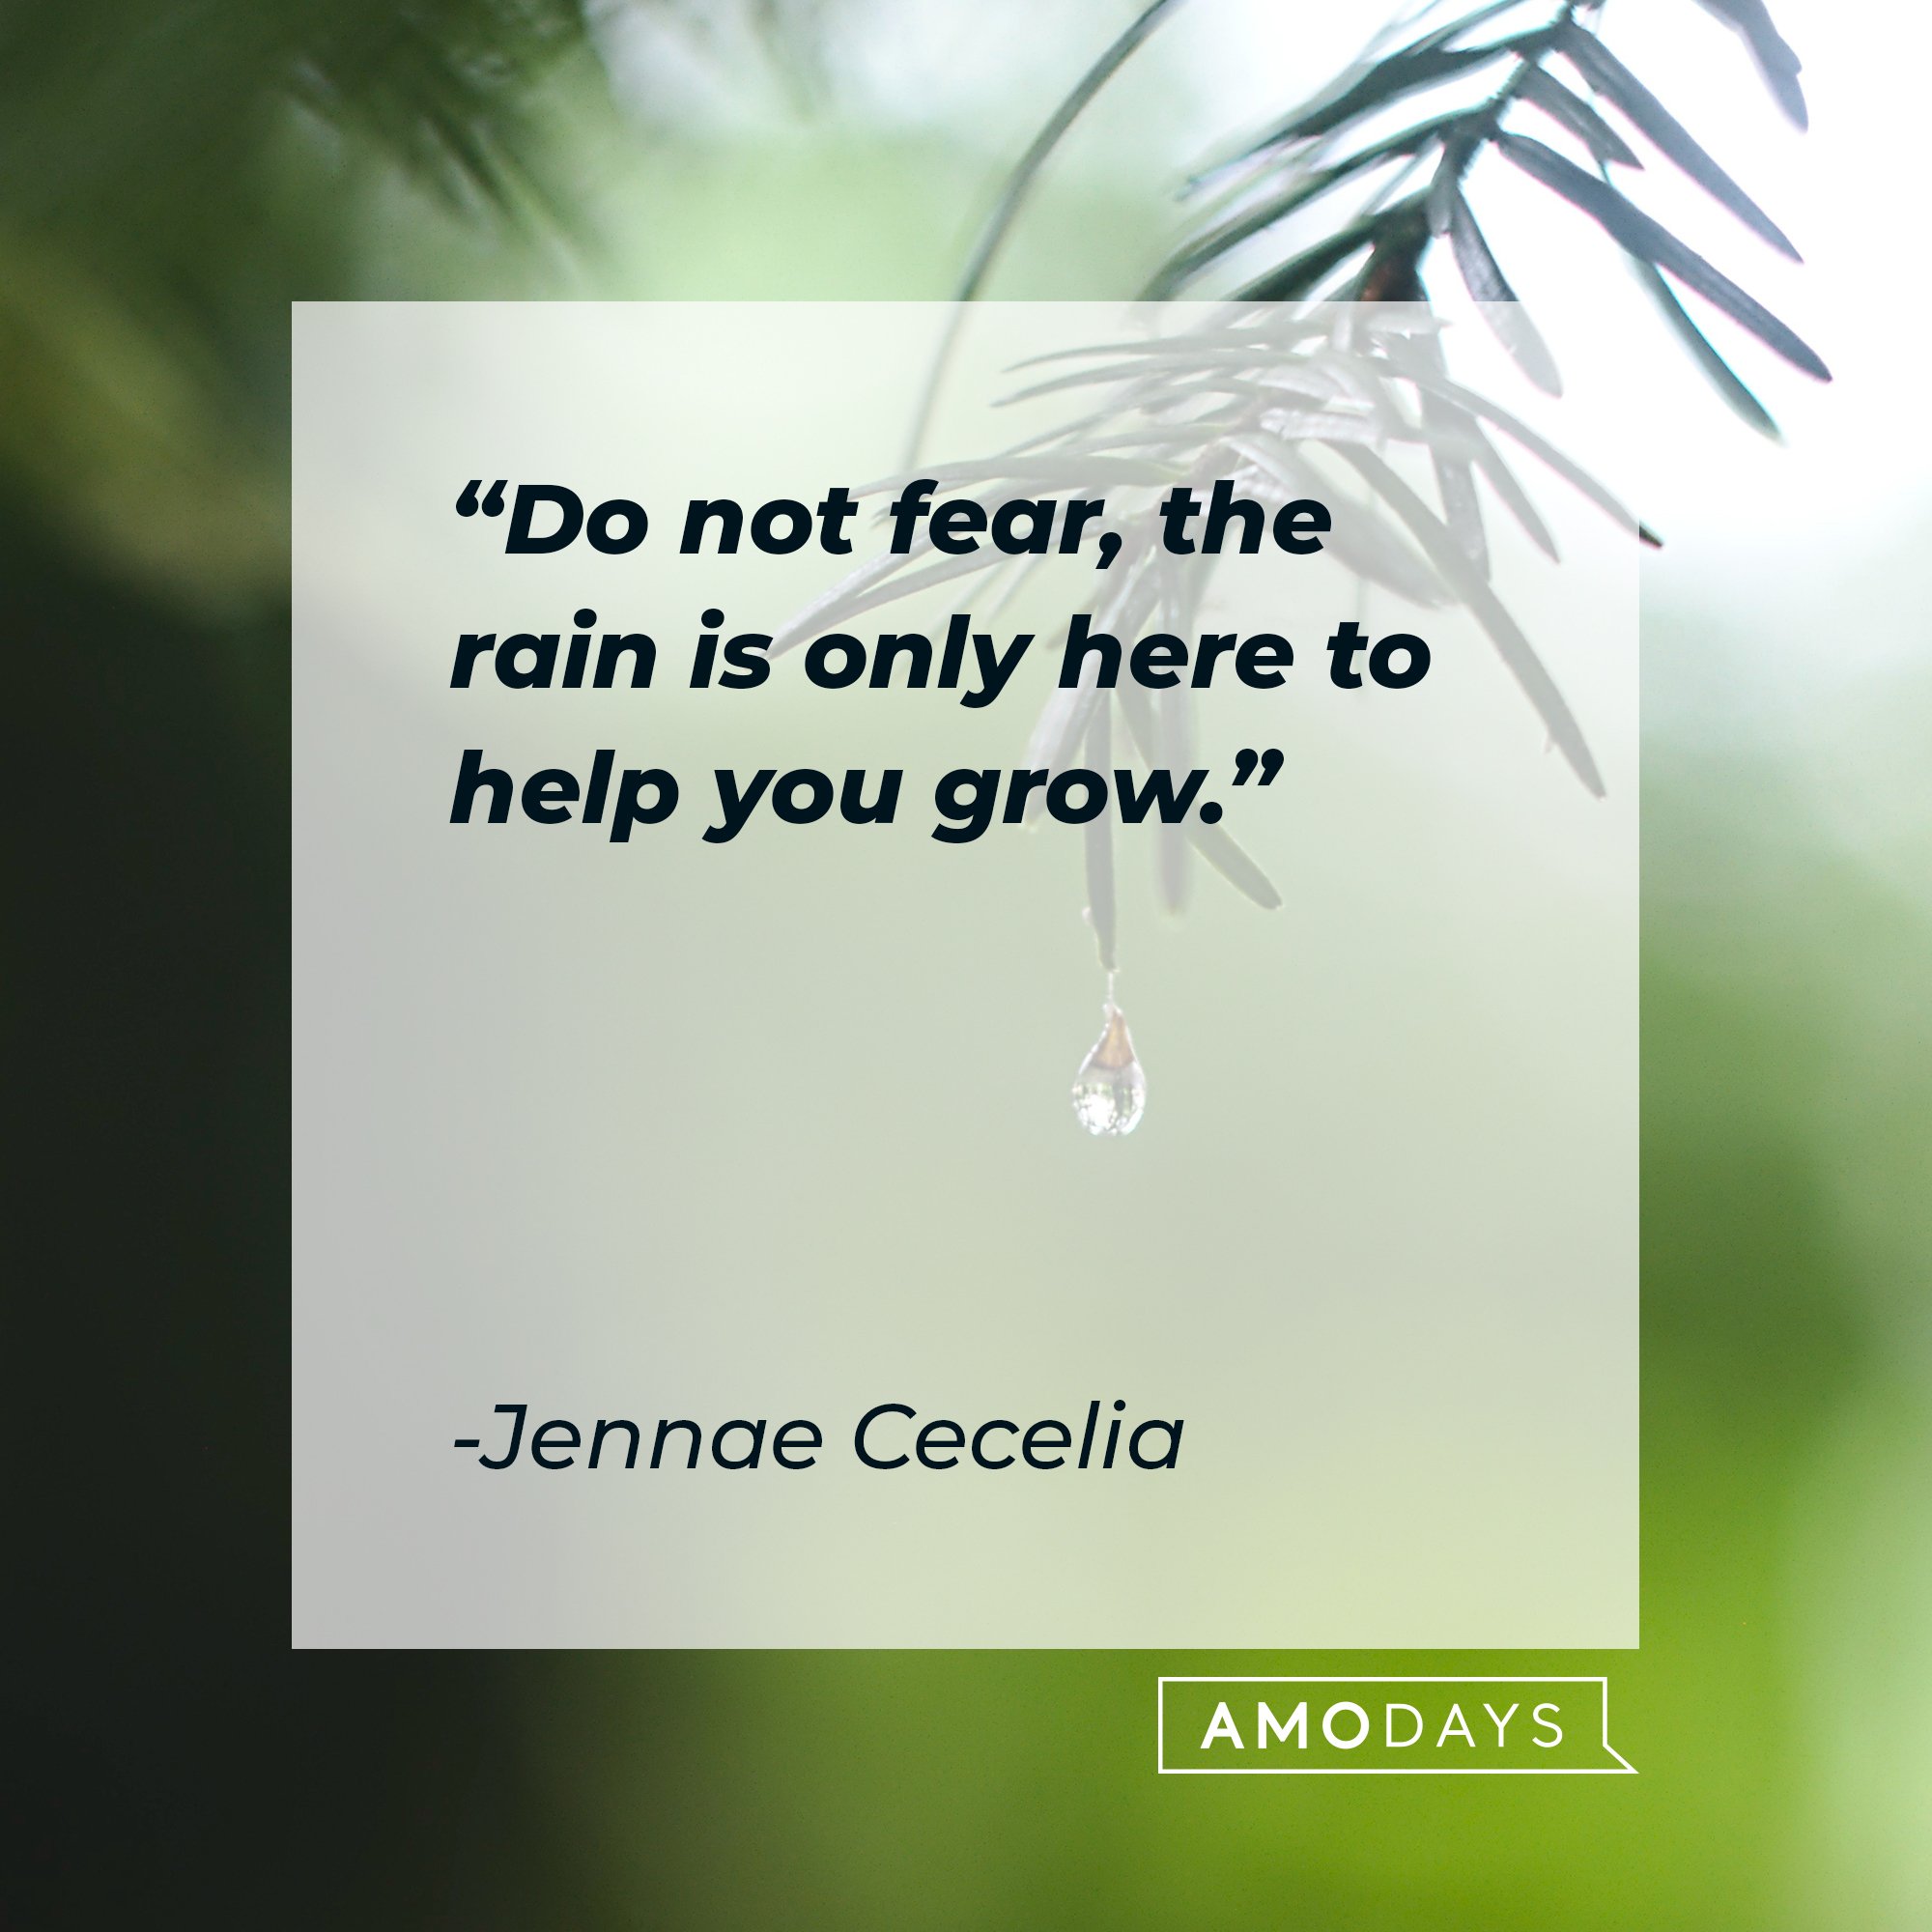 Jennae Cecelia’s quote: "Do not fear, the rain is only here to help you grow." | Image: AmoDays